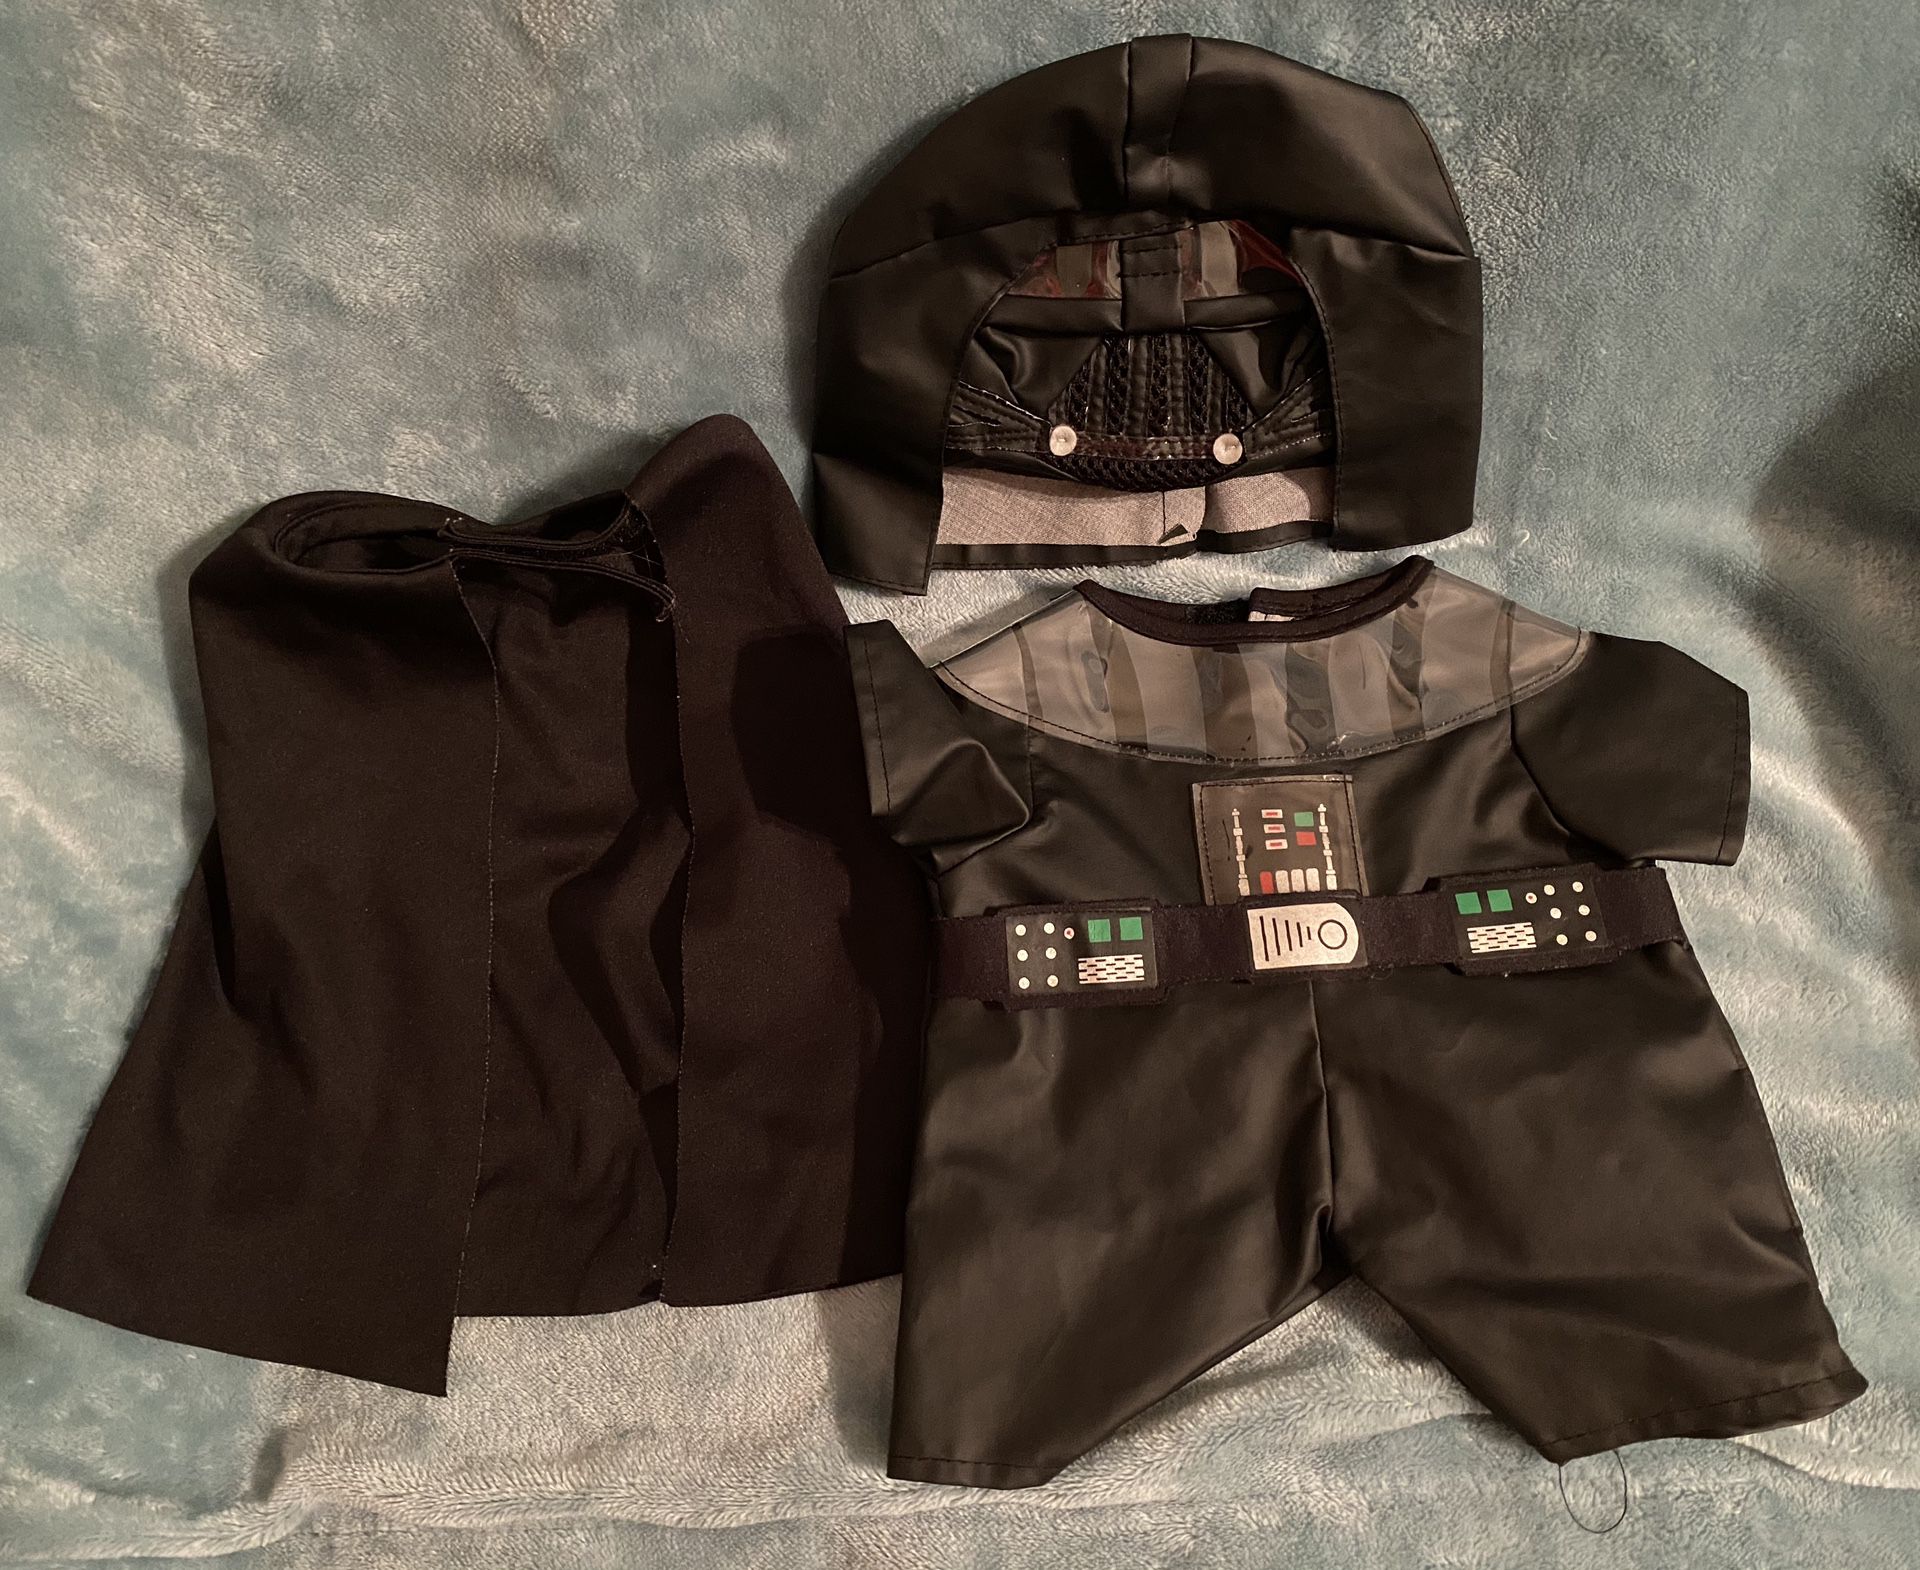 Build A Bear Star Wars Darth Vader Costume/ Outfit